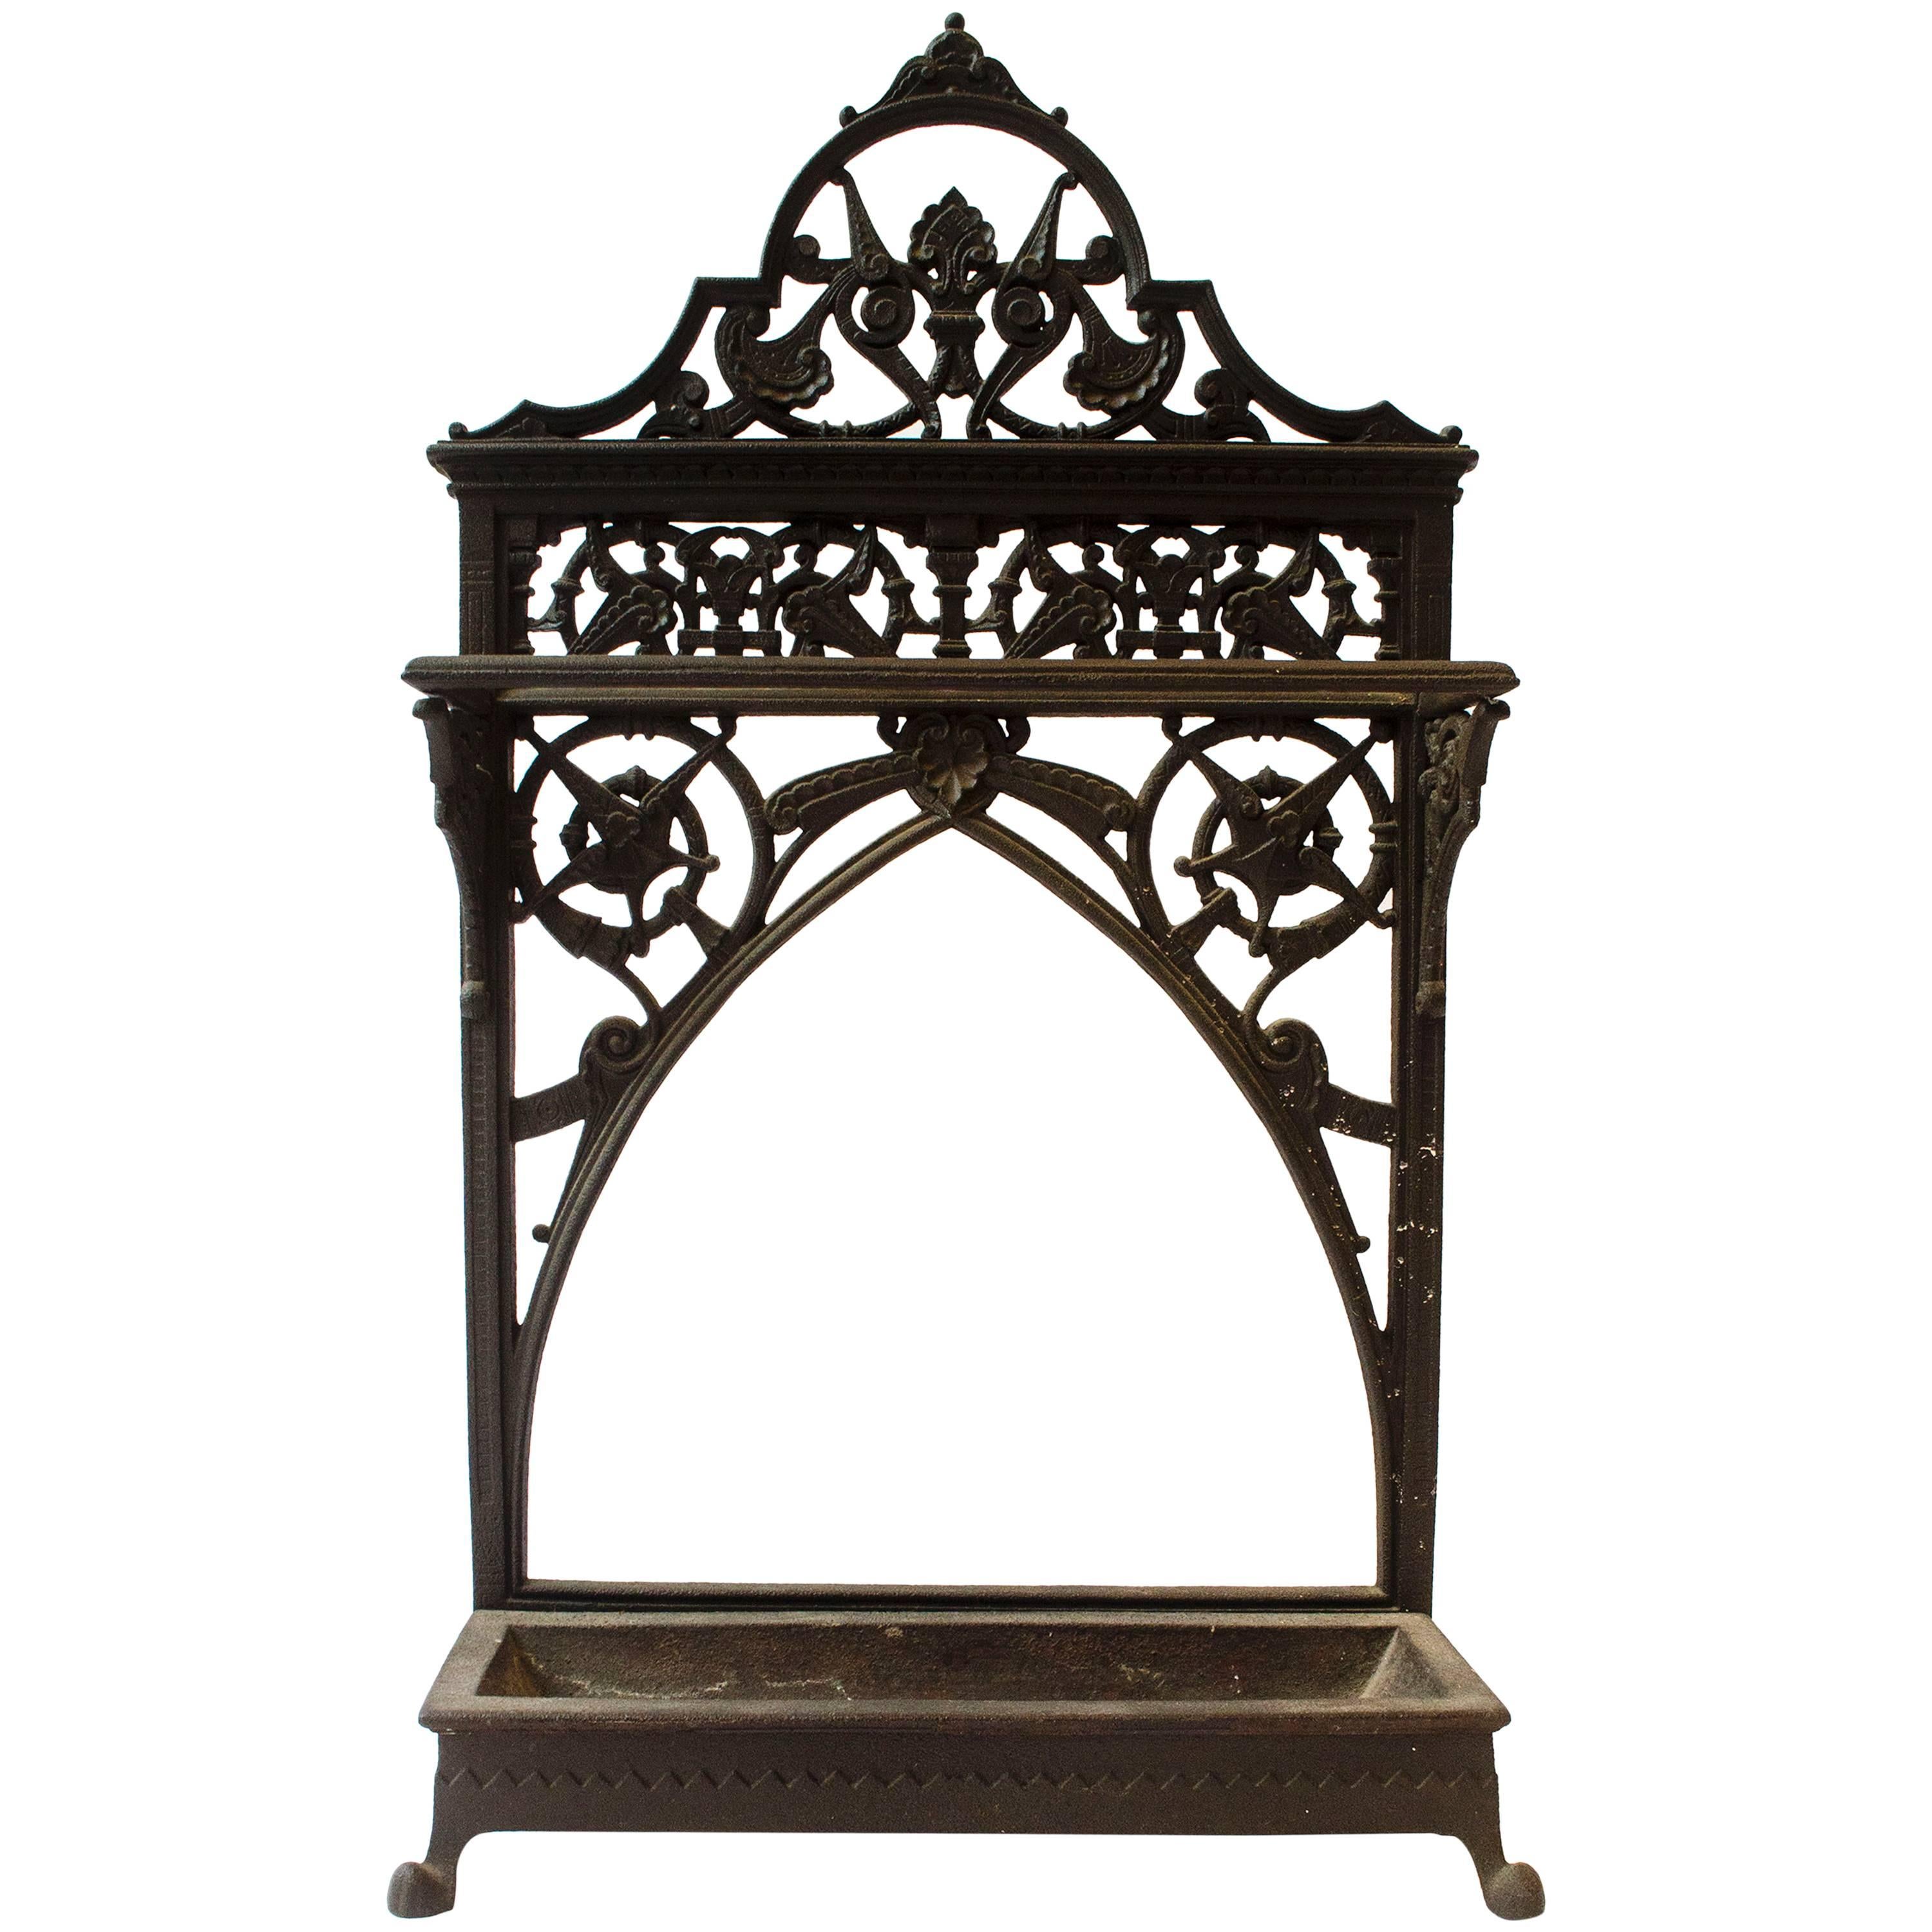 A.I.C Dresser An Aesthetic Movement Cast Iron Stick Stand Made By Coalbrookdale